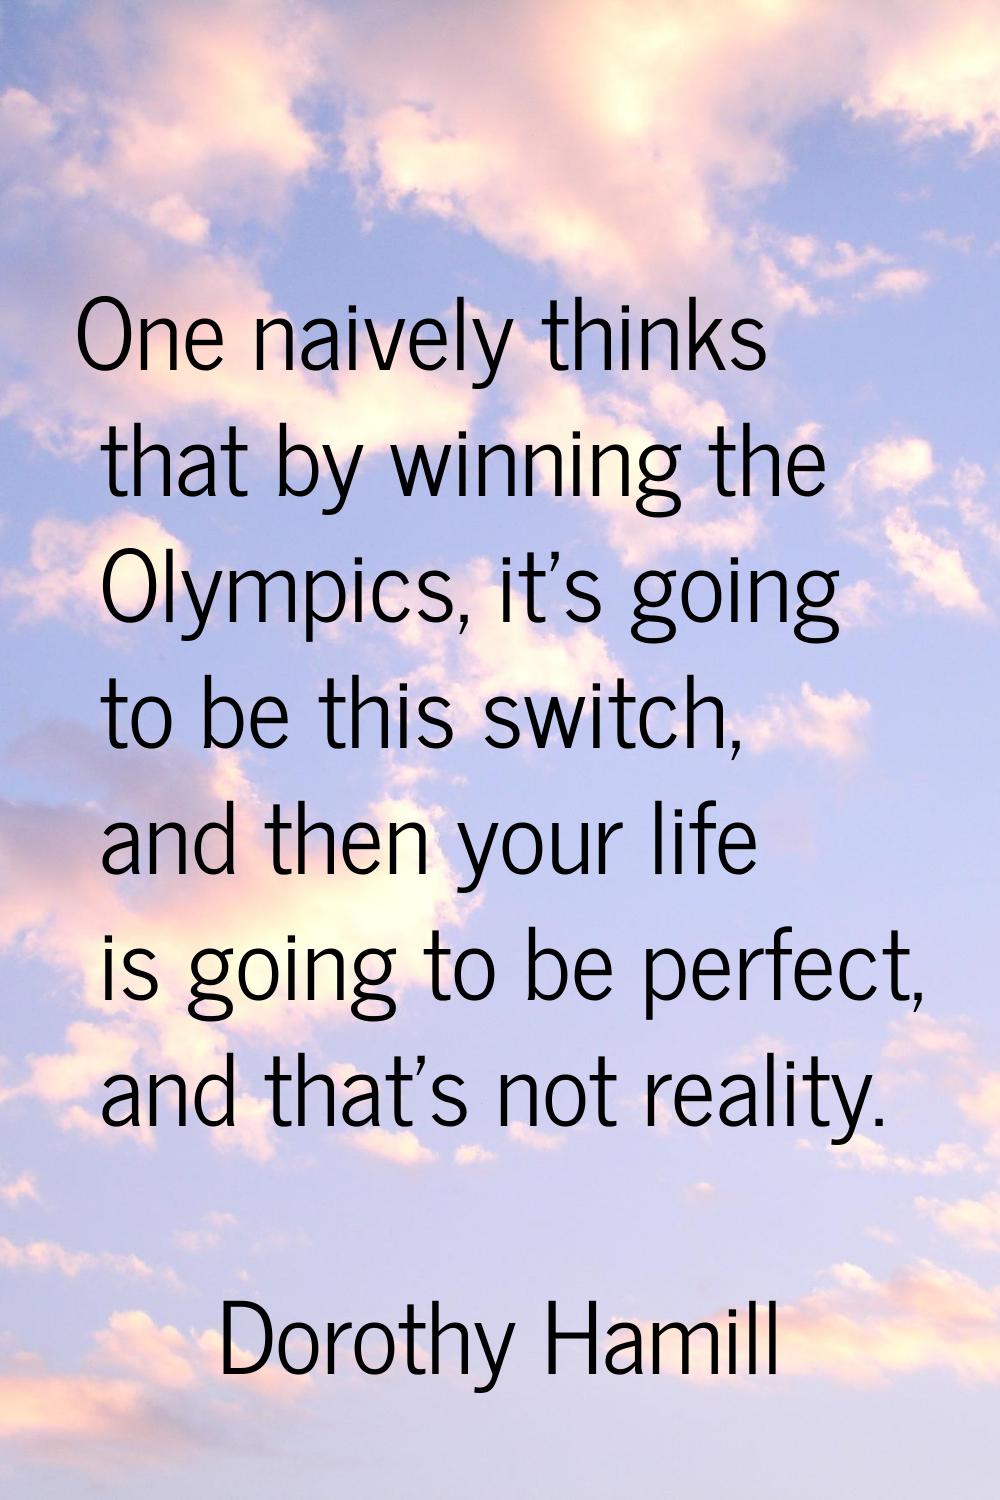 One naively thinks that by winning the Olympics, it's going to be this switch, and then your life i